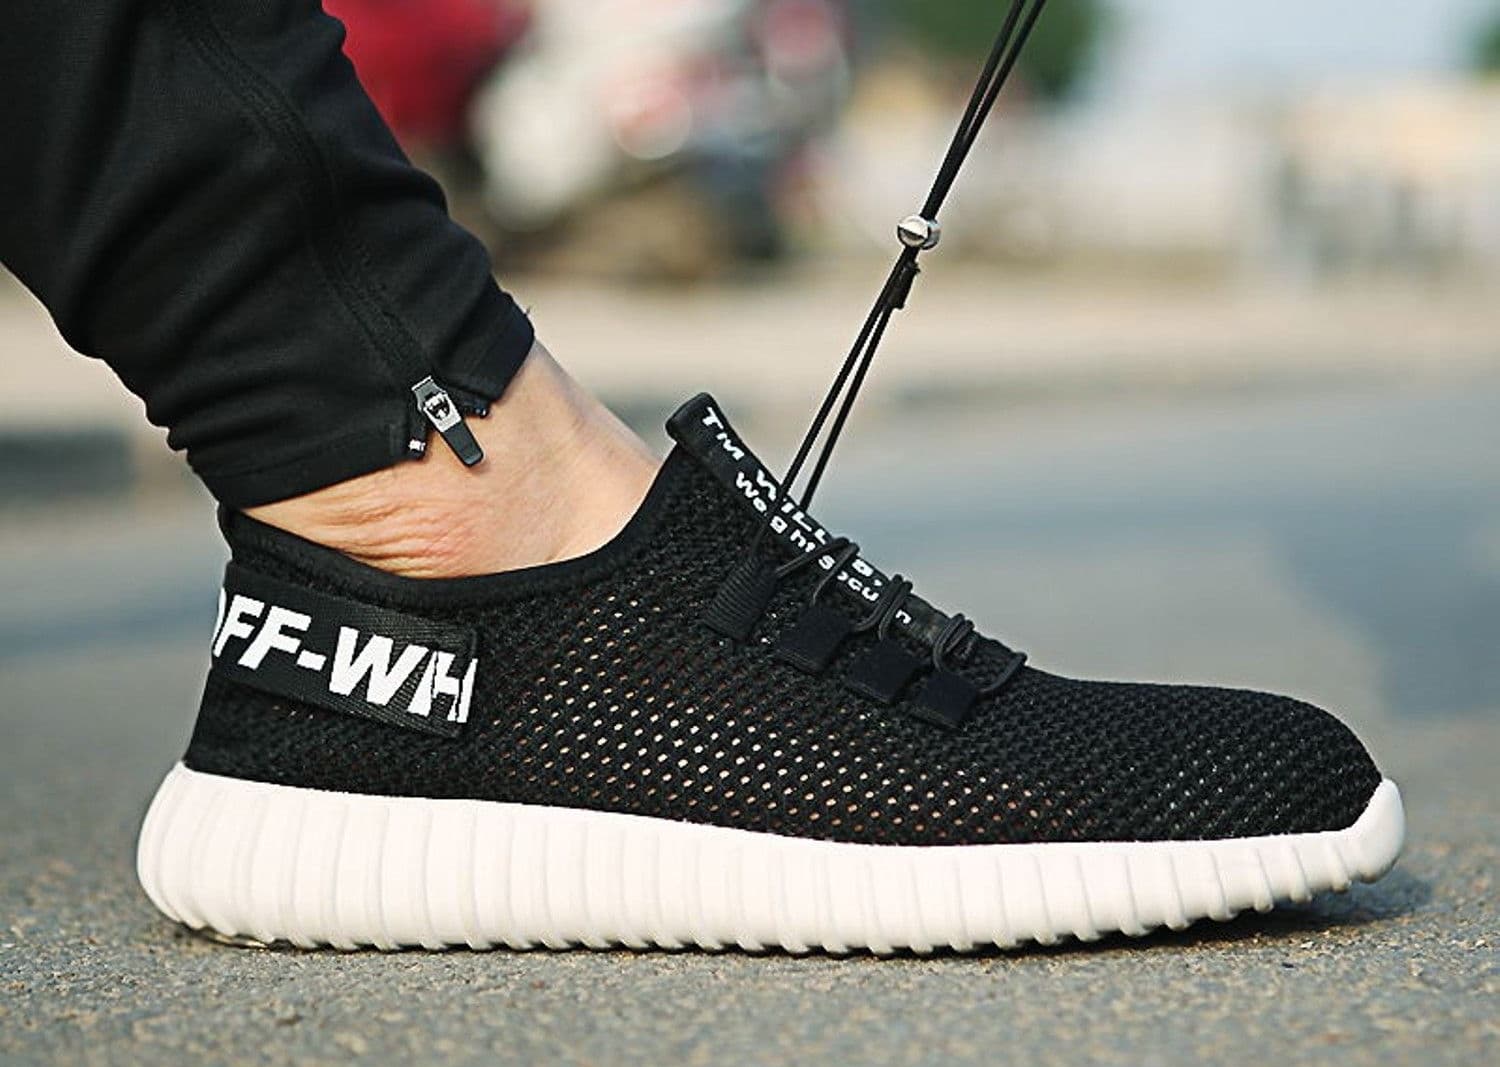 Fake Off-White x Yeezy Indestructible Sneakers (On-Foot)